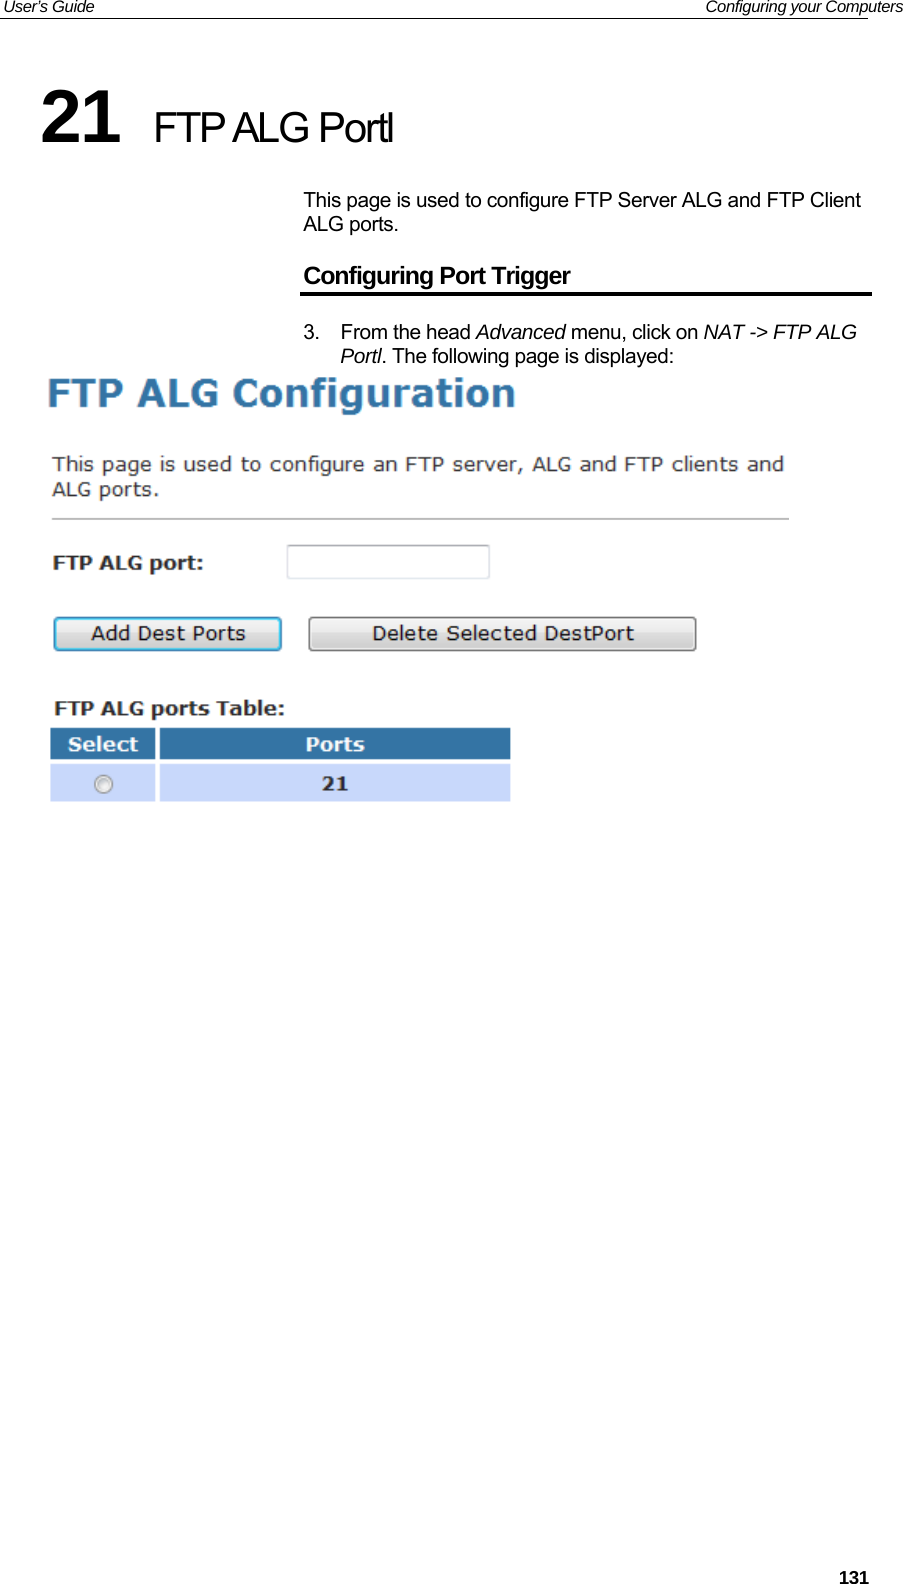 User’s Guide   Configuring your Computers 21  FTP ALG Portl This page is used to configure FTP Server ALG and FTP Client ALG ports. Configuring Port Trigger 3. From the head Advanced menu, click on NAT -&gt; FTP ALG Portl. The following page is displayed:                      131